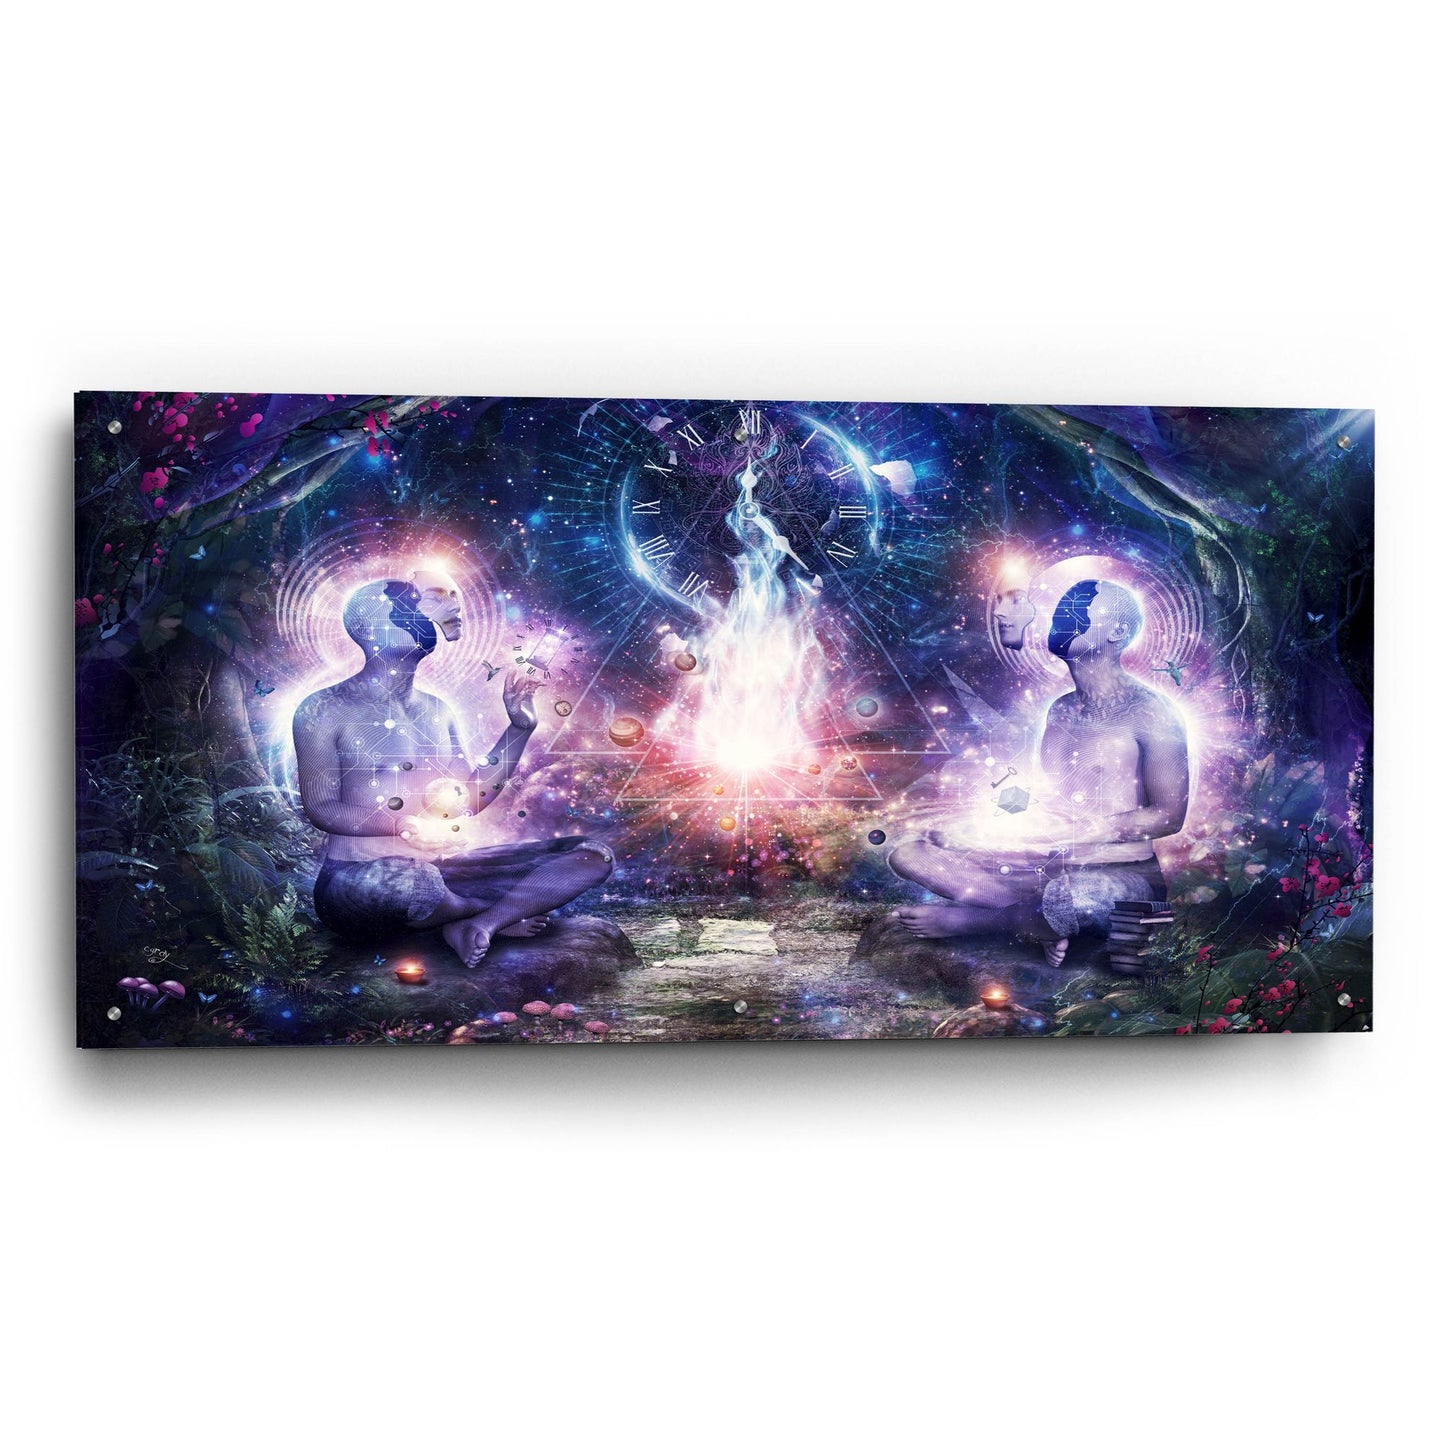 Epic Art 'In The Light Of Knowledge' by Cameron Gray, Acrylic Glass Wall Art,48x24